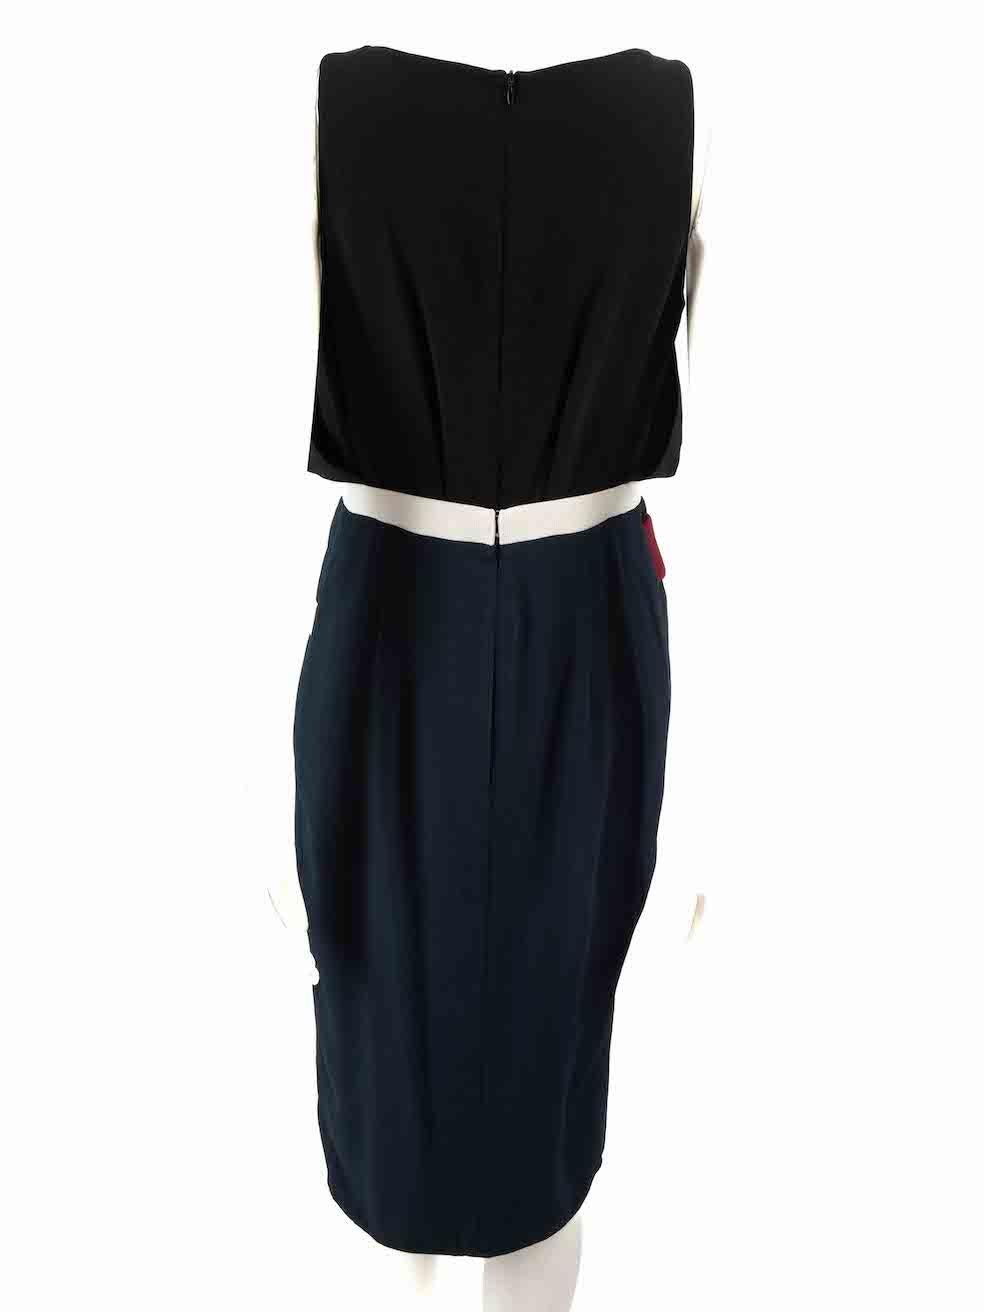 Peter Pilotto Sleeveless Buckled Knee-Length Dress Size L In Excellent Condition For Sale In London, GB